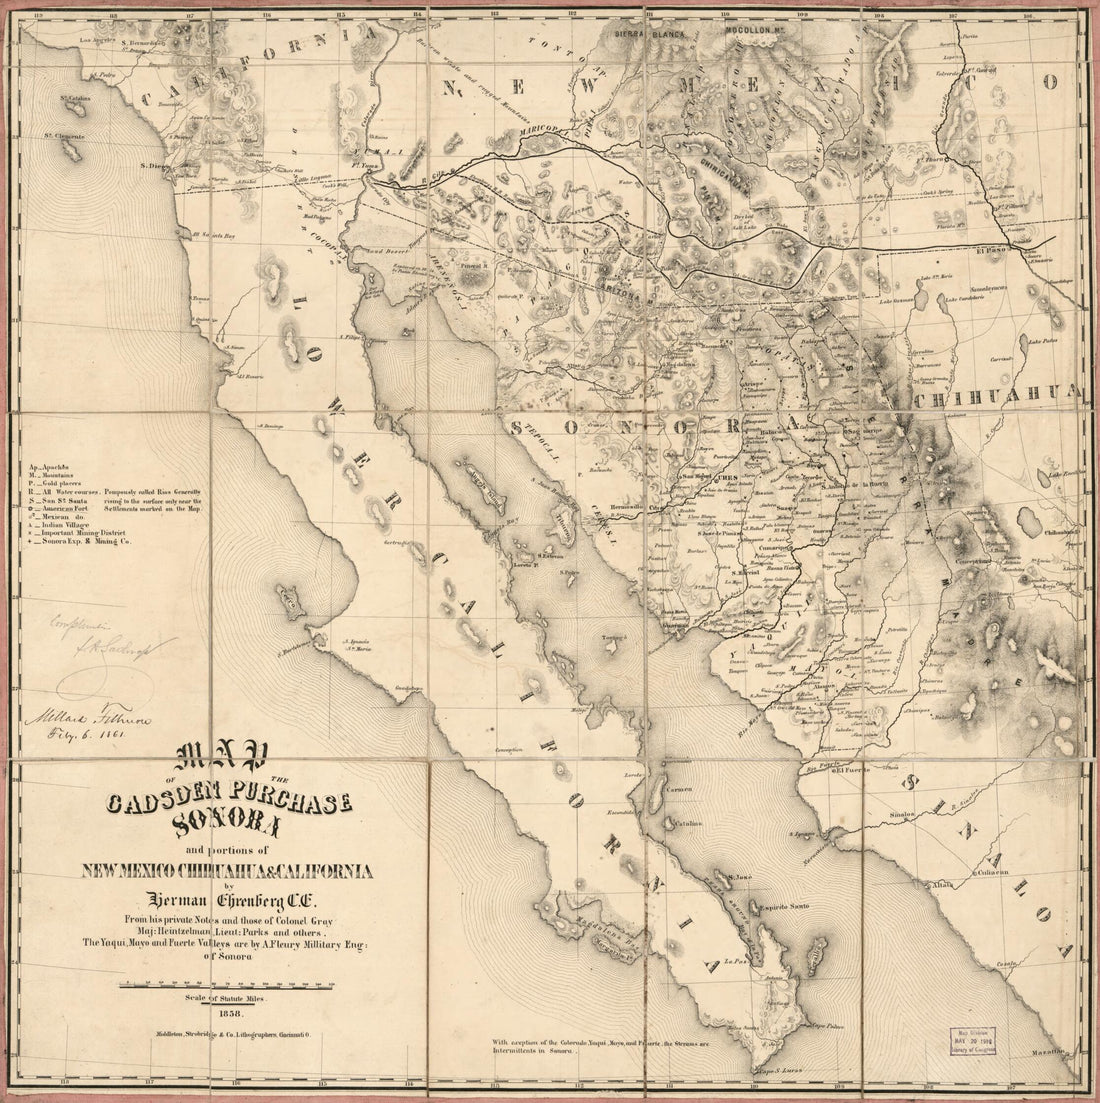 This old map of Map of the Gadsden Purchase : Sonora and Portions of New Mexico, Chihuaua &amp; California from 1858 was created by Herman Ehrenberg, Millard Fillmore, Strobridge &amp; Co Middleton in 1858